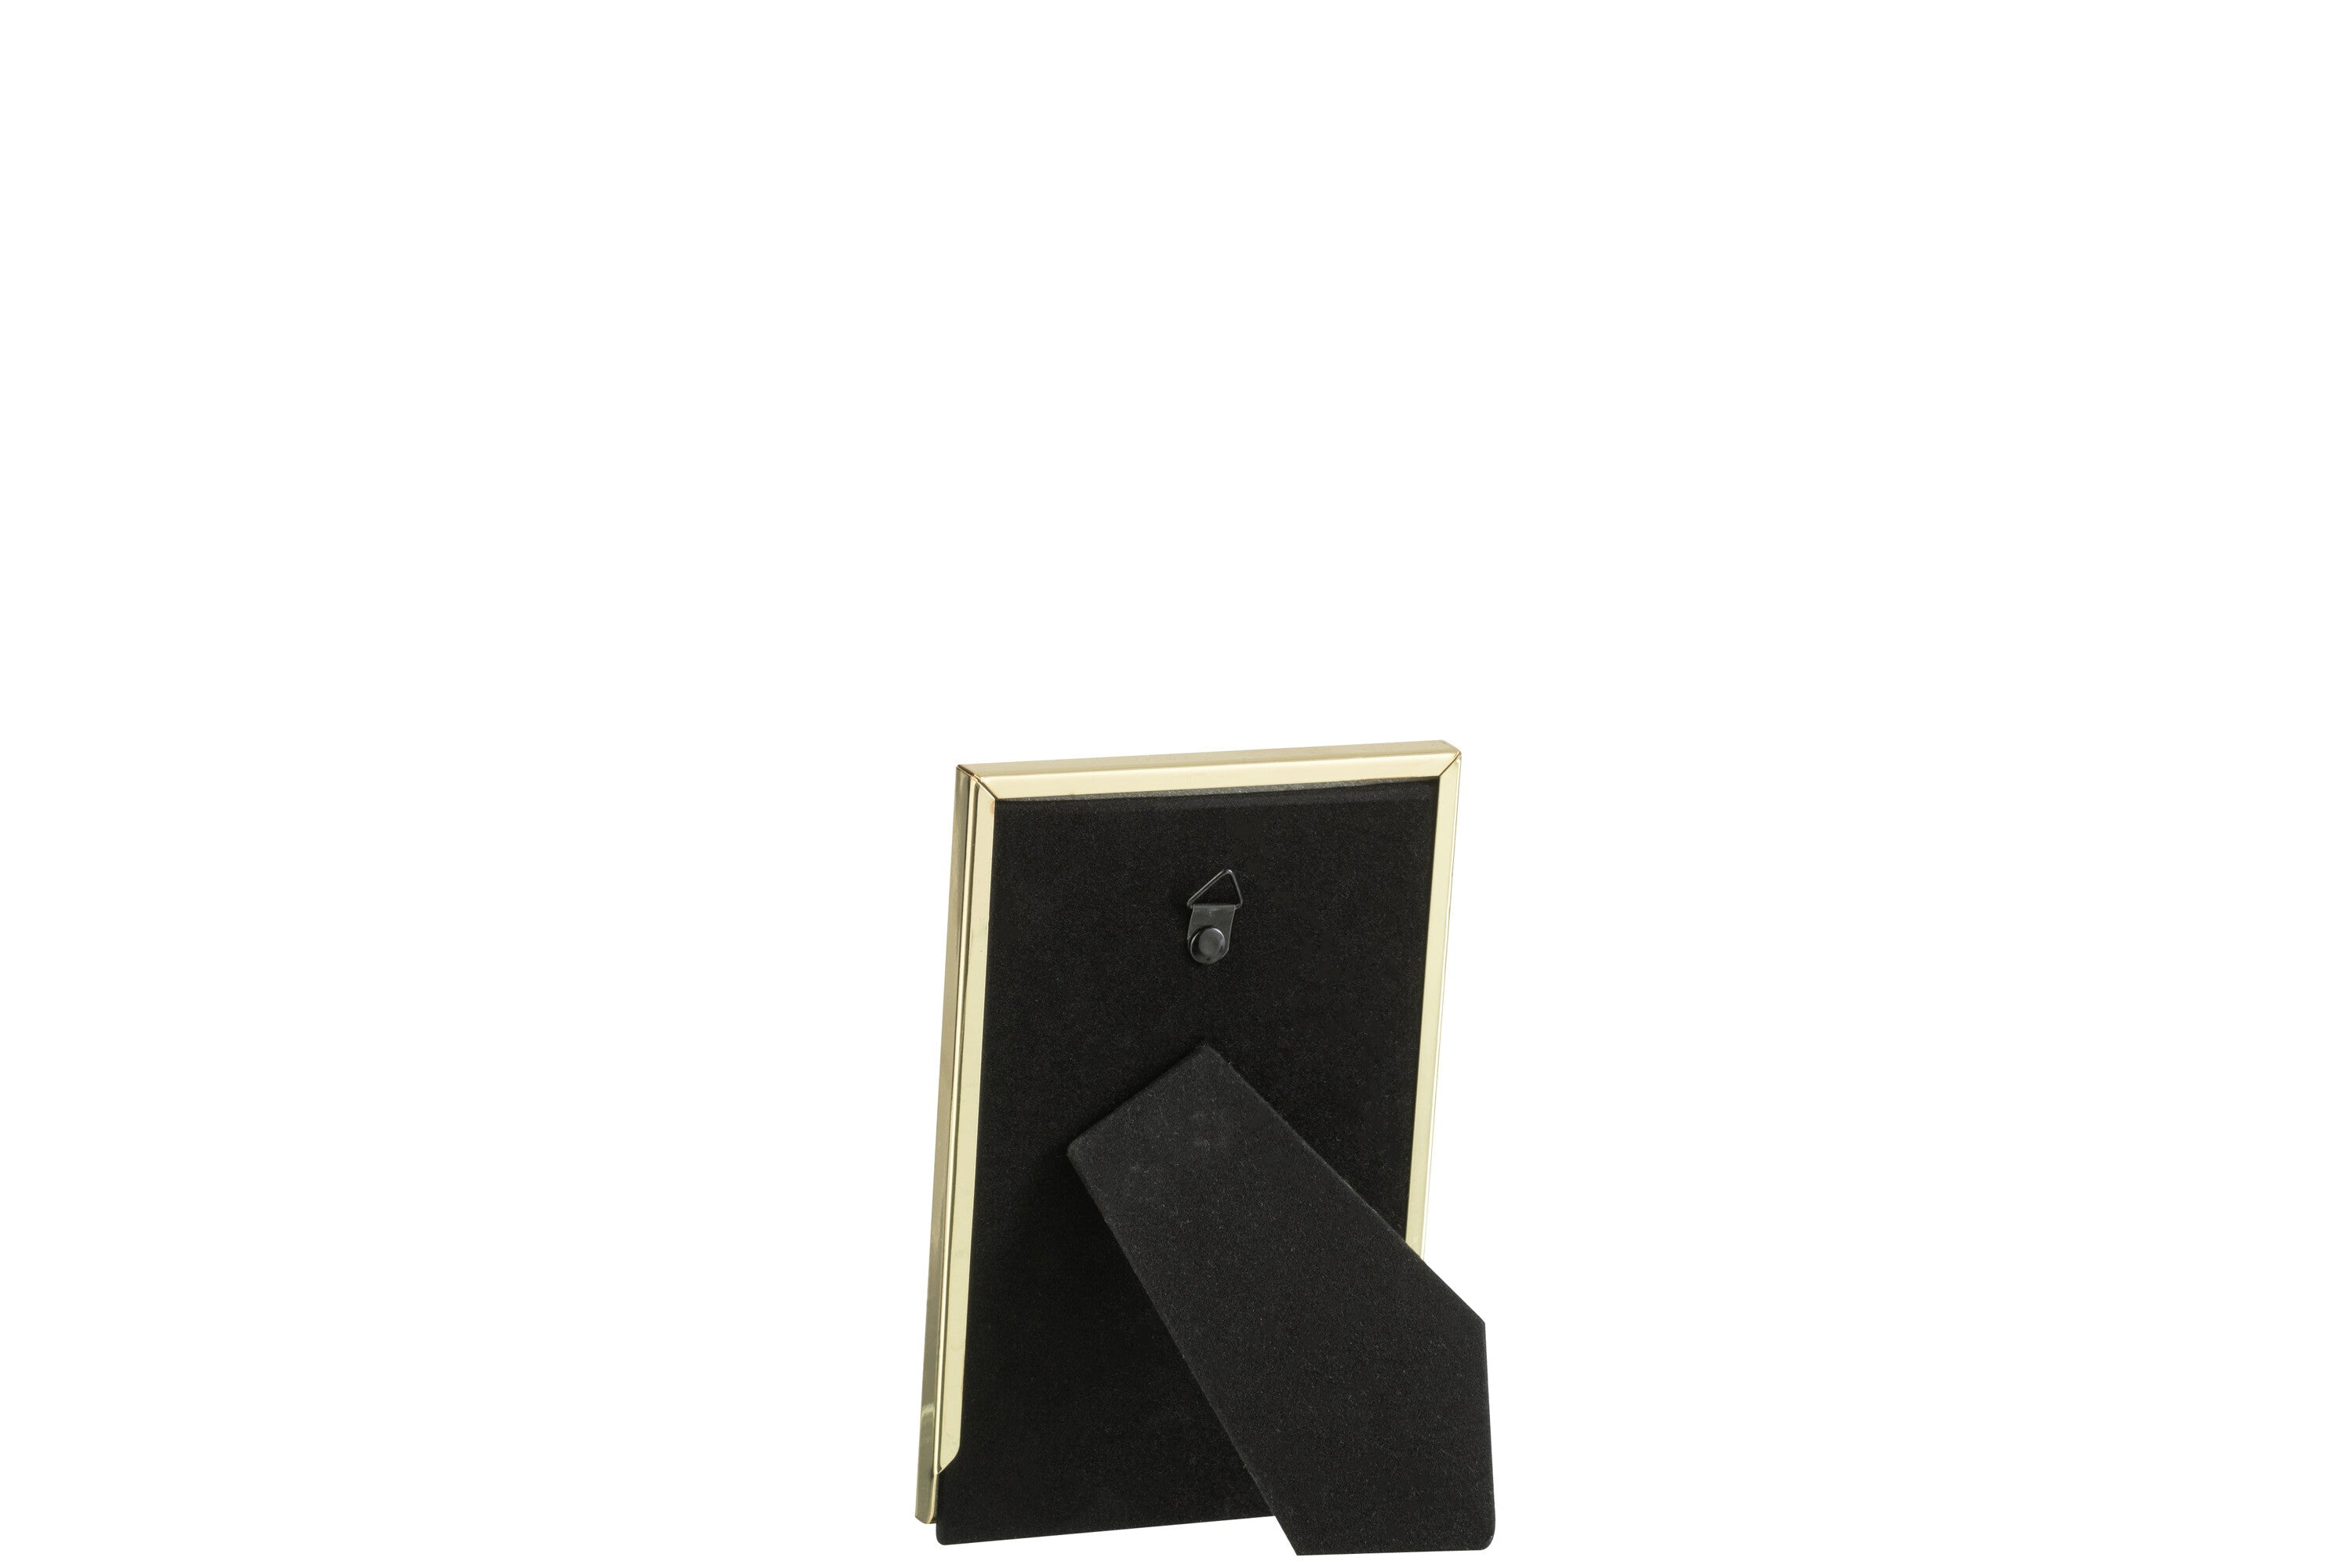 Fab Gifts | J-Line Photo Frame Hammered Gold 4X6 by Weirs of Baggot Street